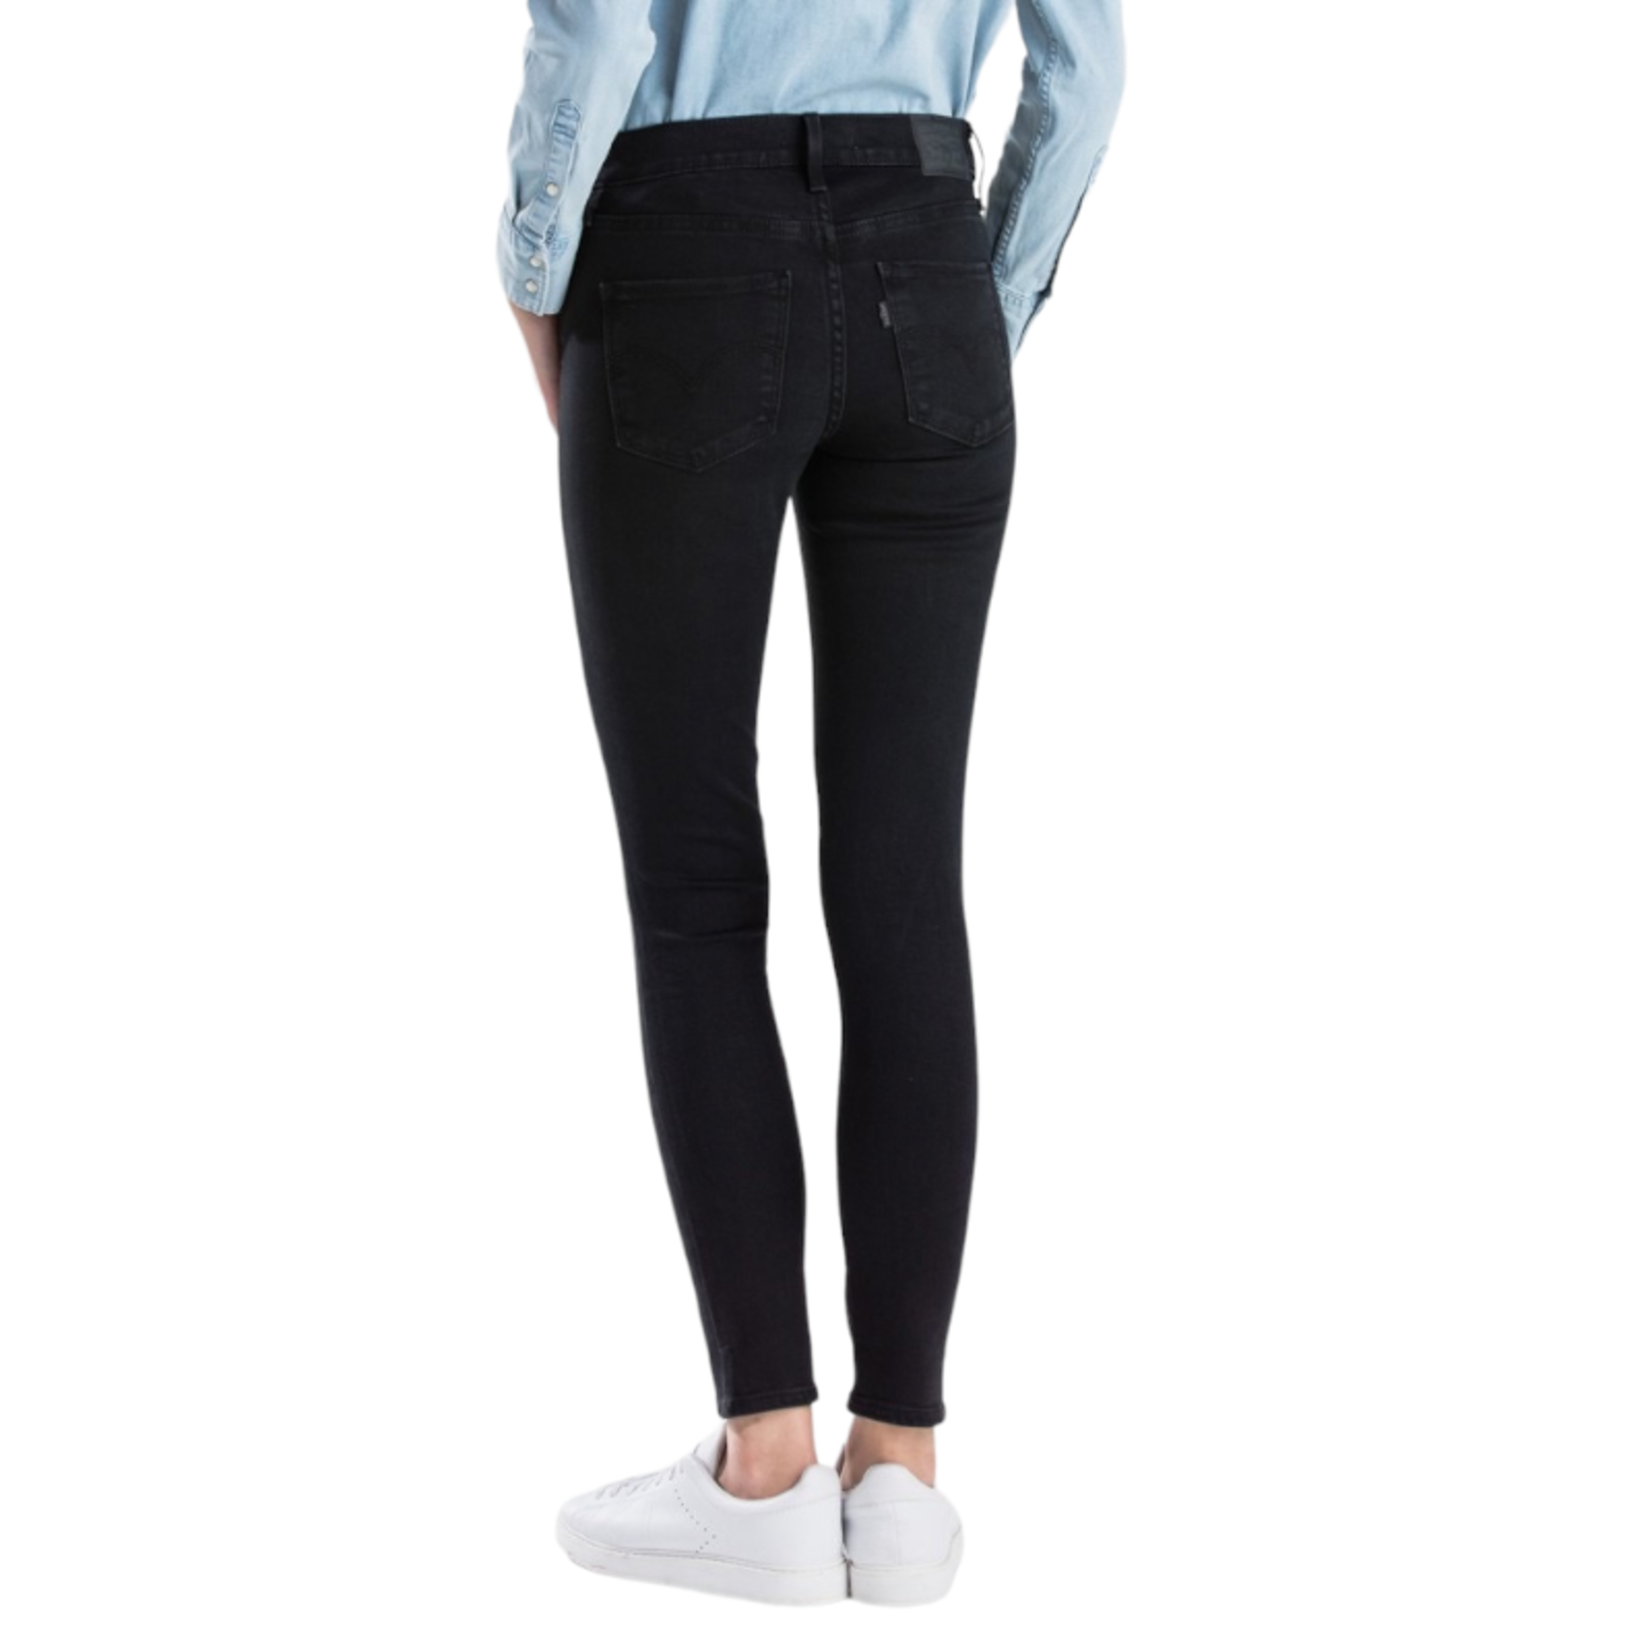 LEVIS LEVIS 311  SHAPING SKINNY JEANS 19626-0000